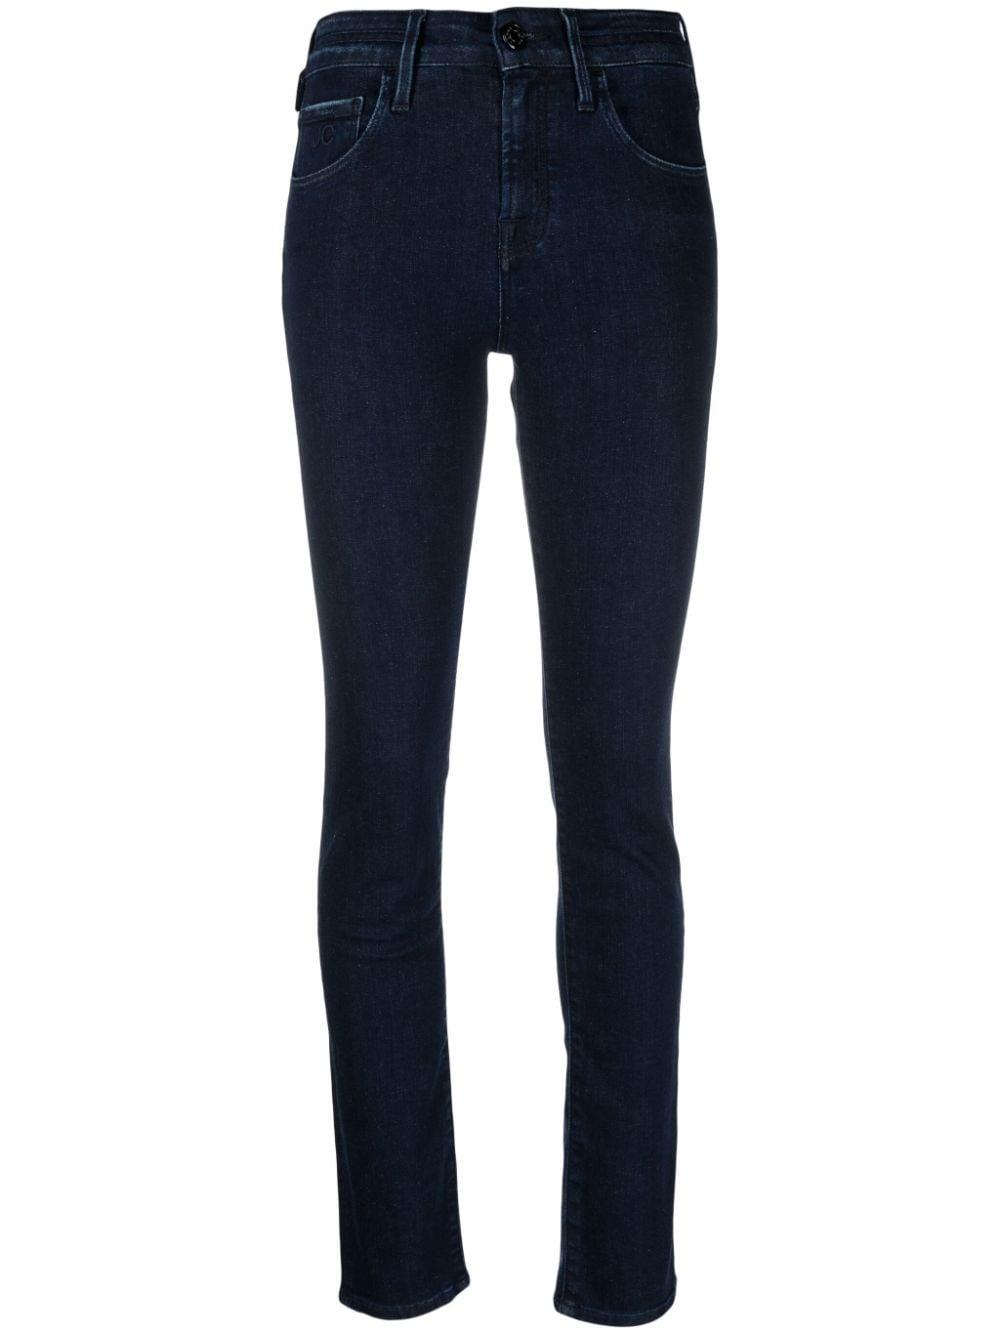 Jacob Cohen Mid-rise Skinny Jeans in Blue | Lyst